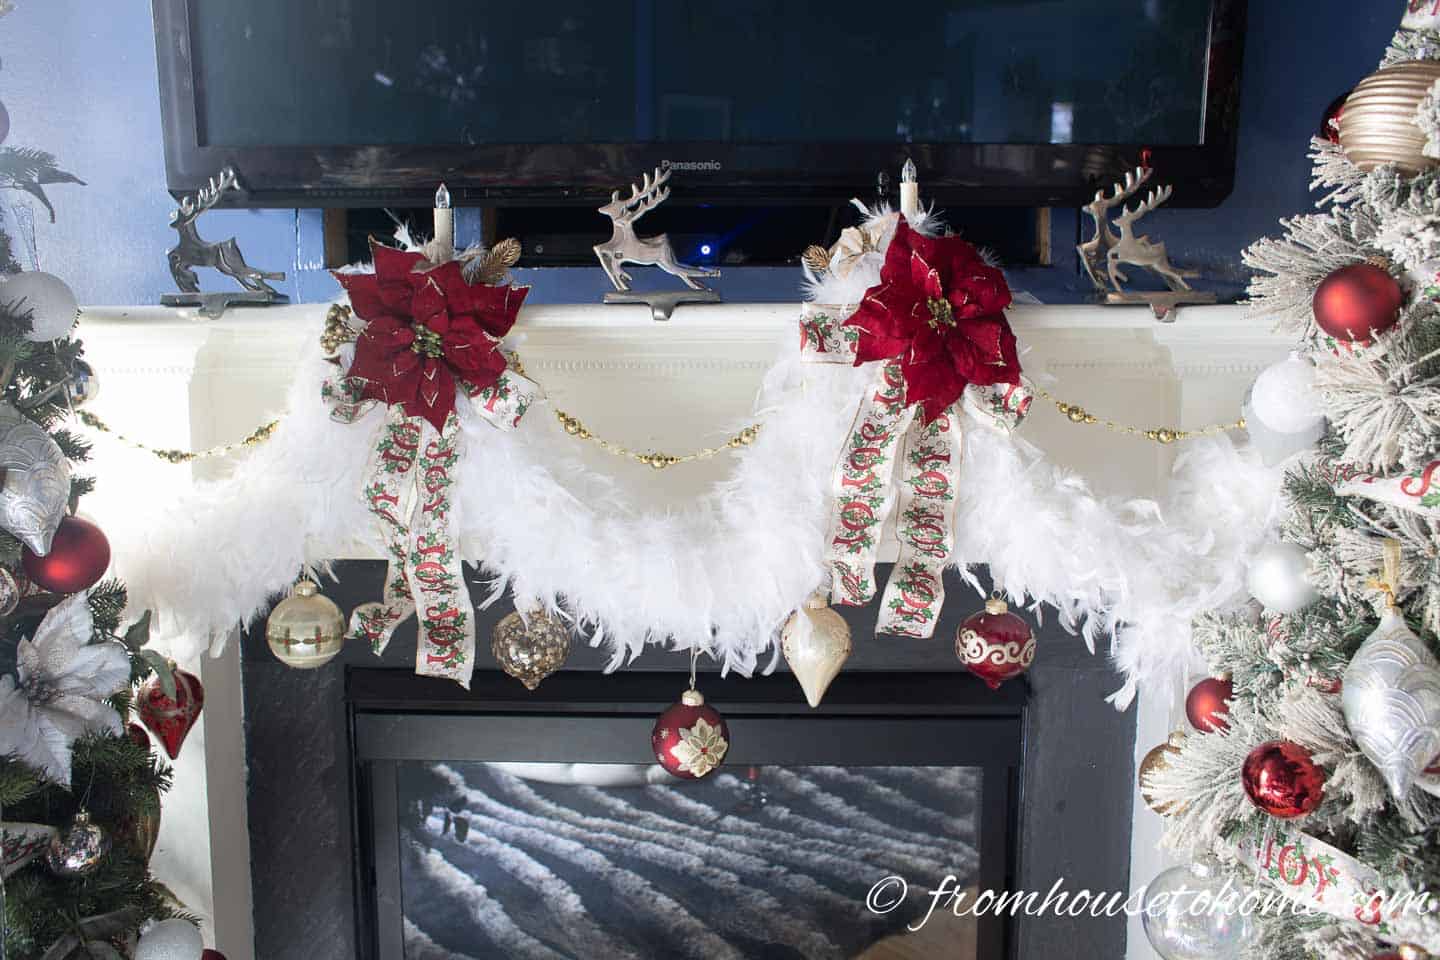 White feather boas and red poinsettia clips used as a Christmas garland over the fireplace